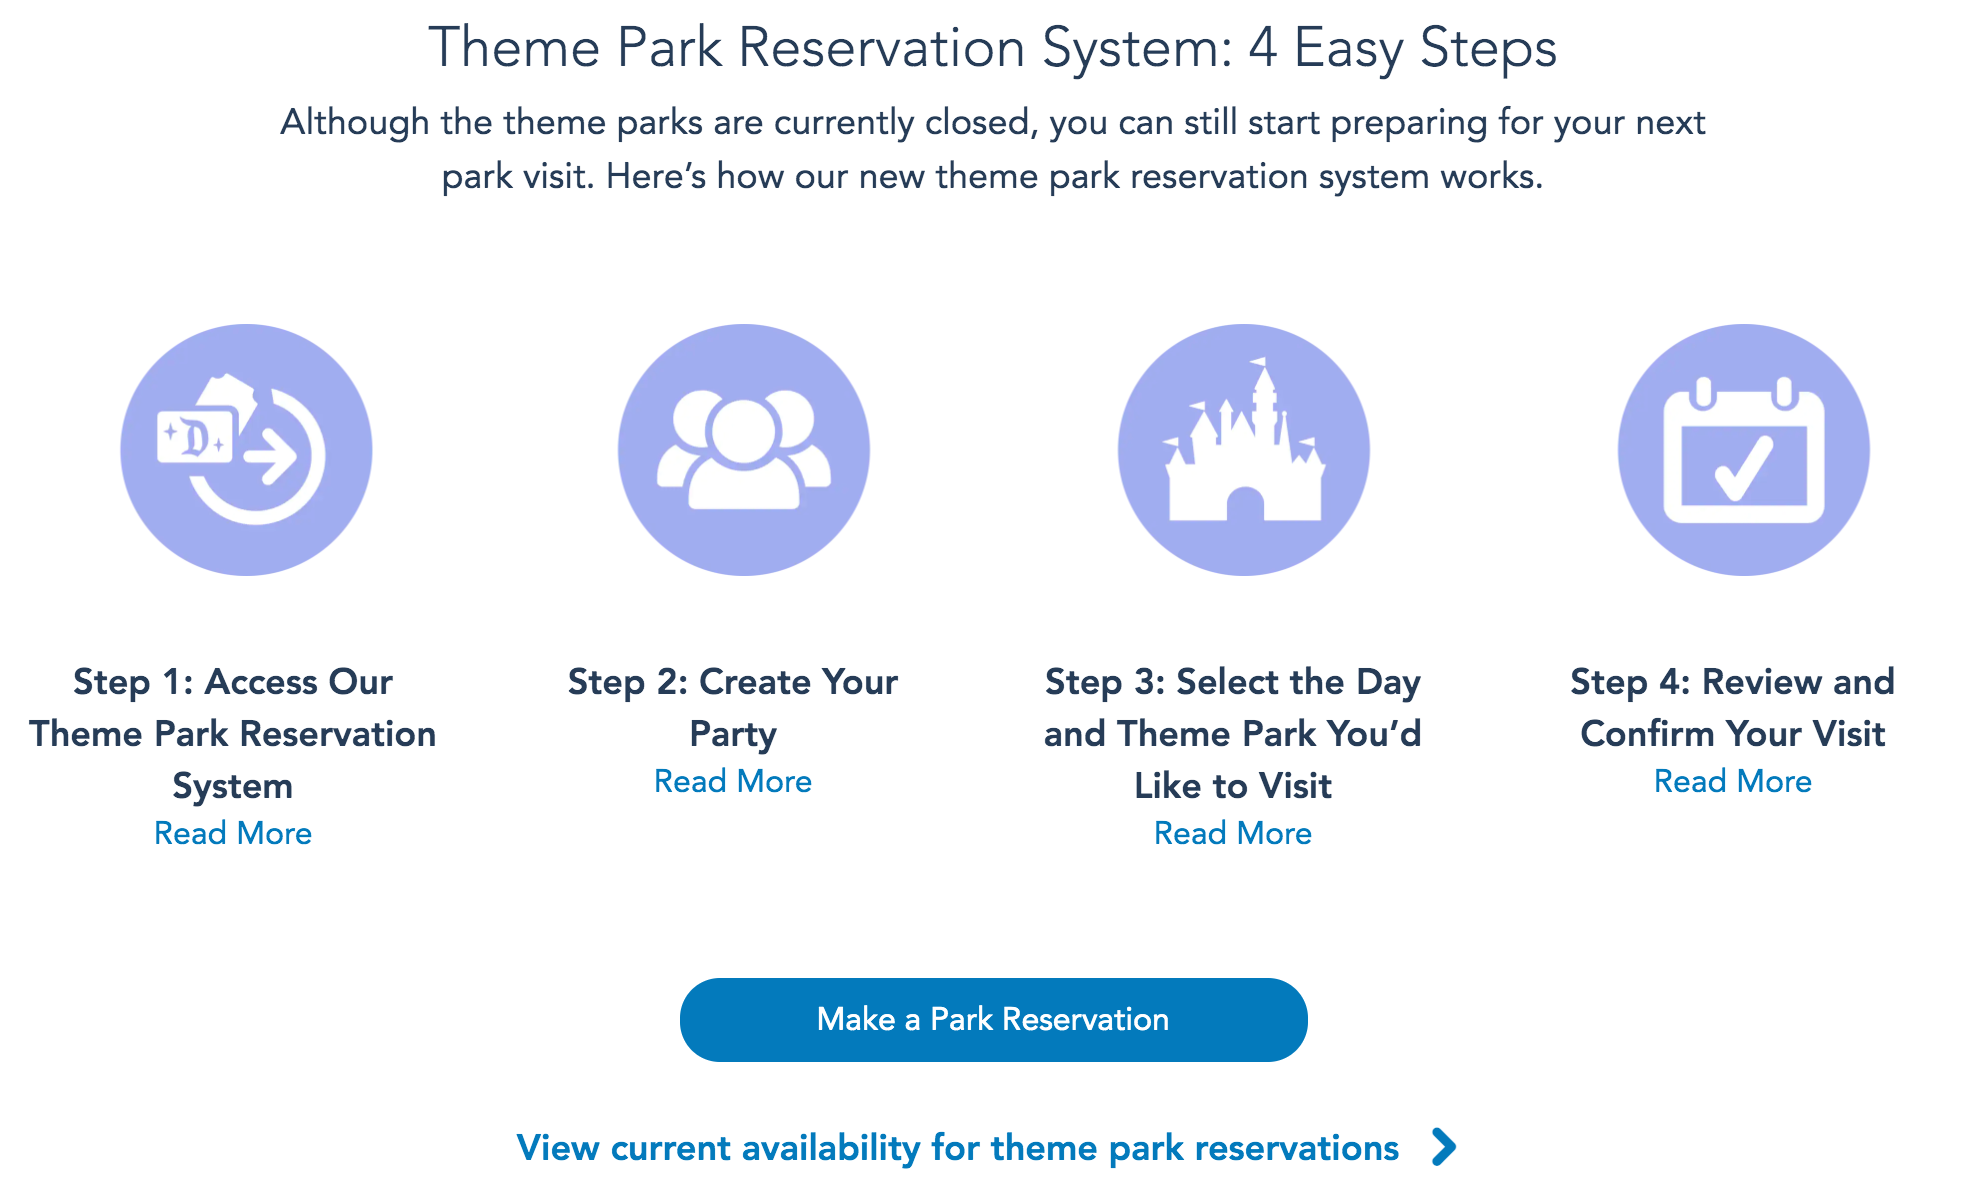 VIDEO: Step-by-Step Tutorial on NEW Disney Park Pass Reservation System at  Walt Disney World - WDW News Today